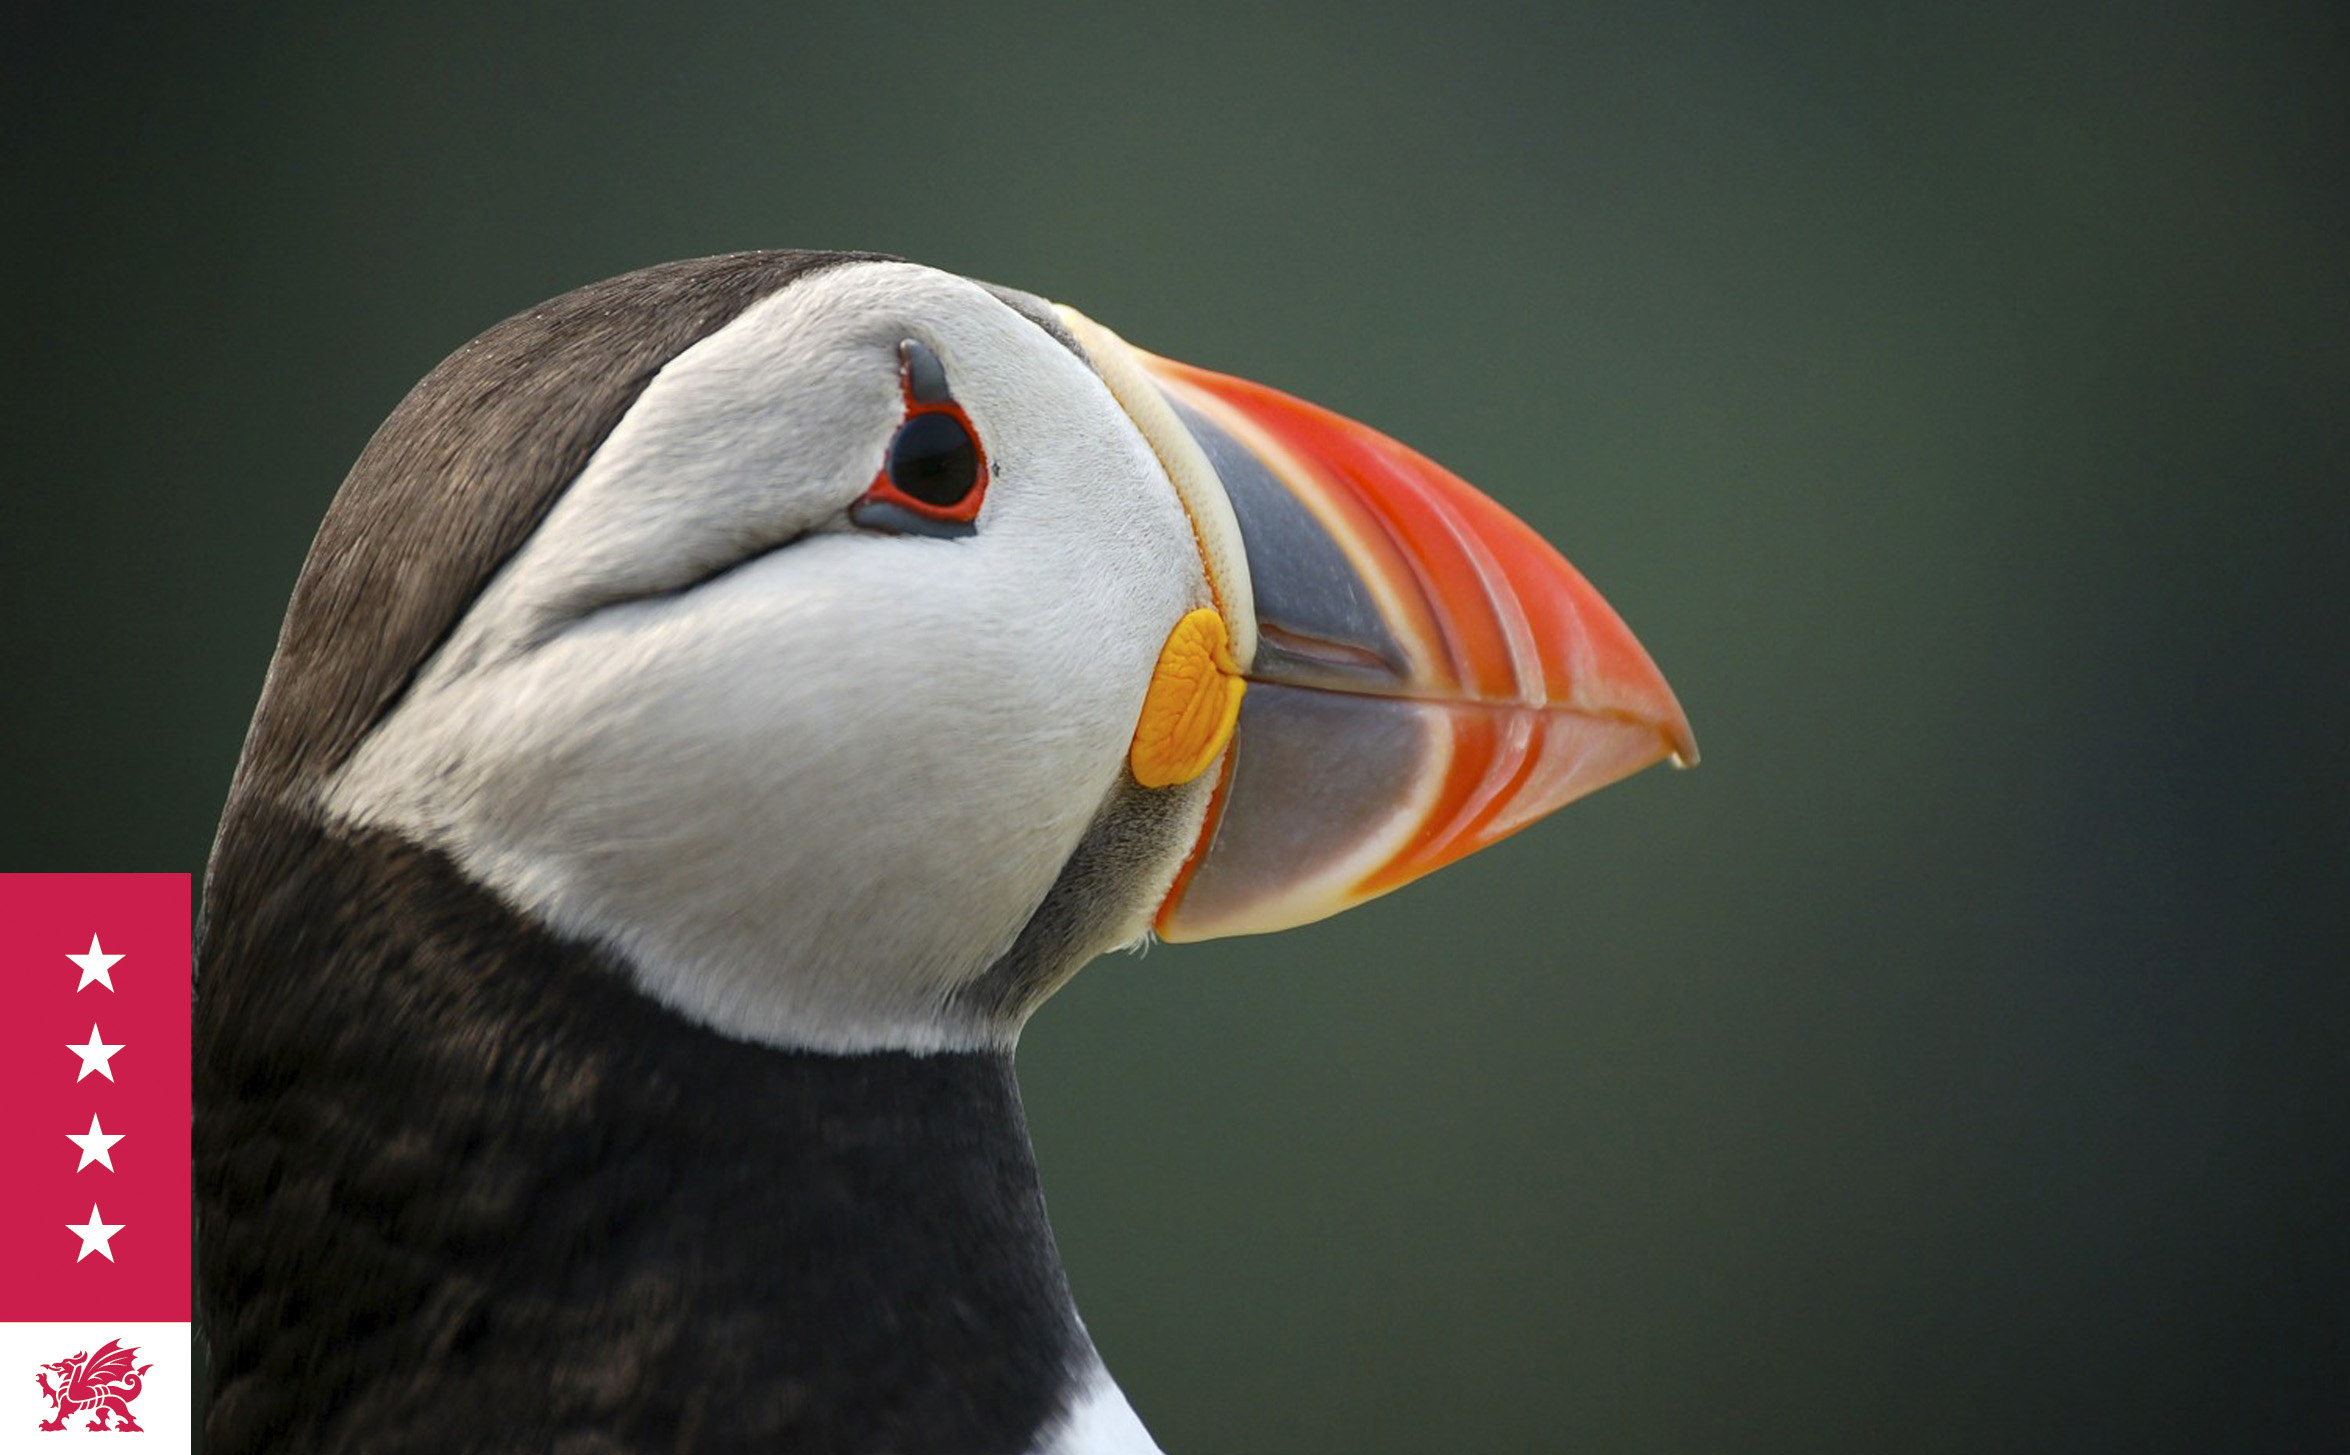 Puffins are just one of species of wildlife